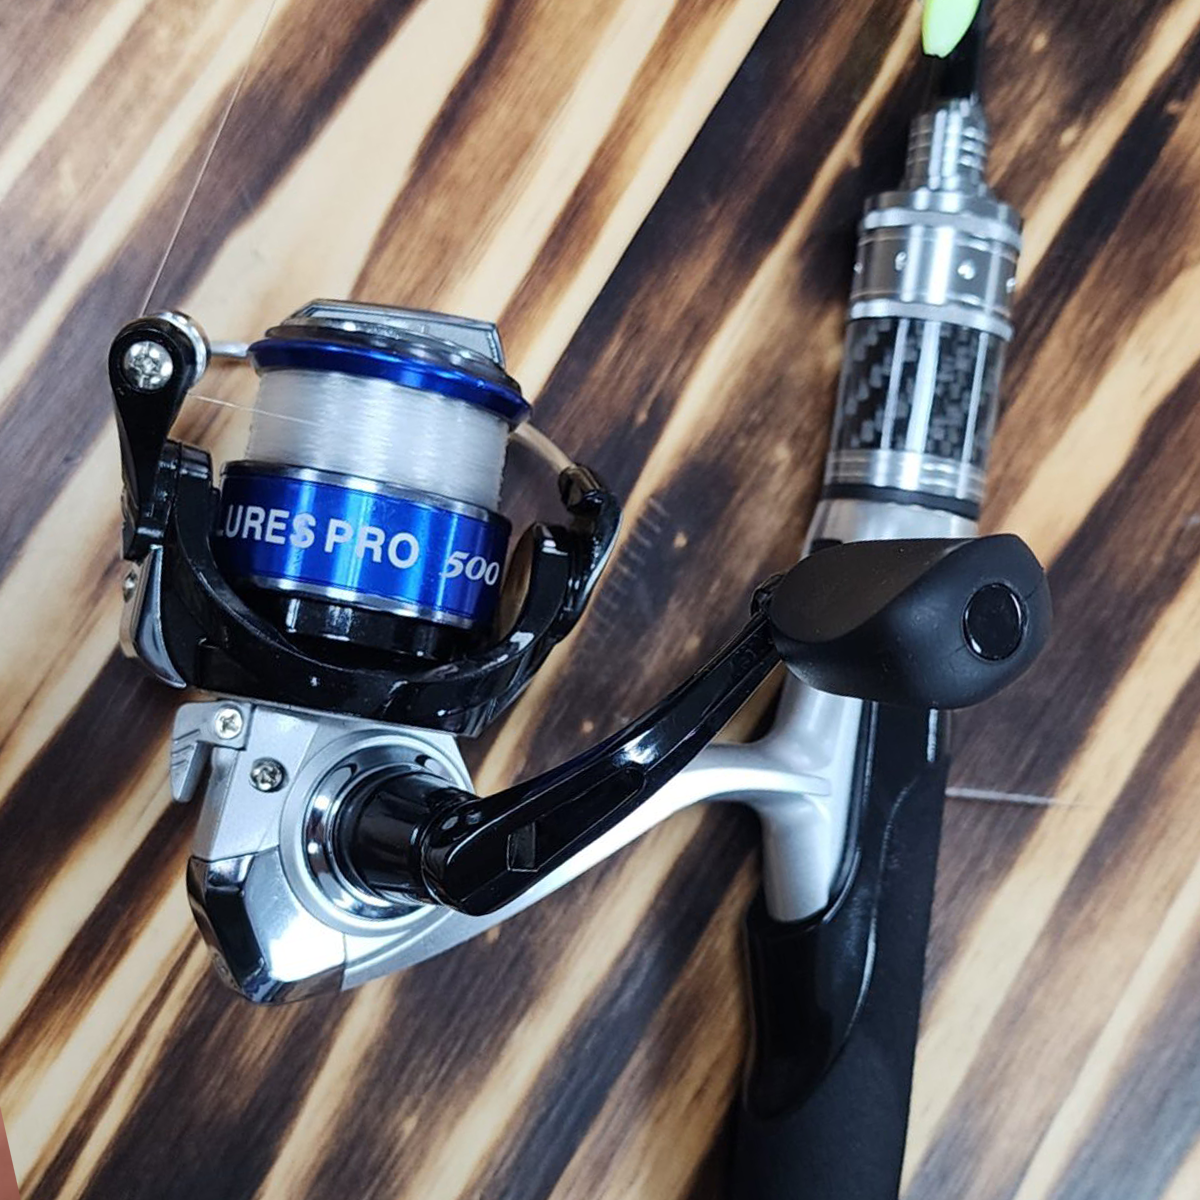 Cast Cray Lures Pro 1000 Reel